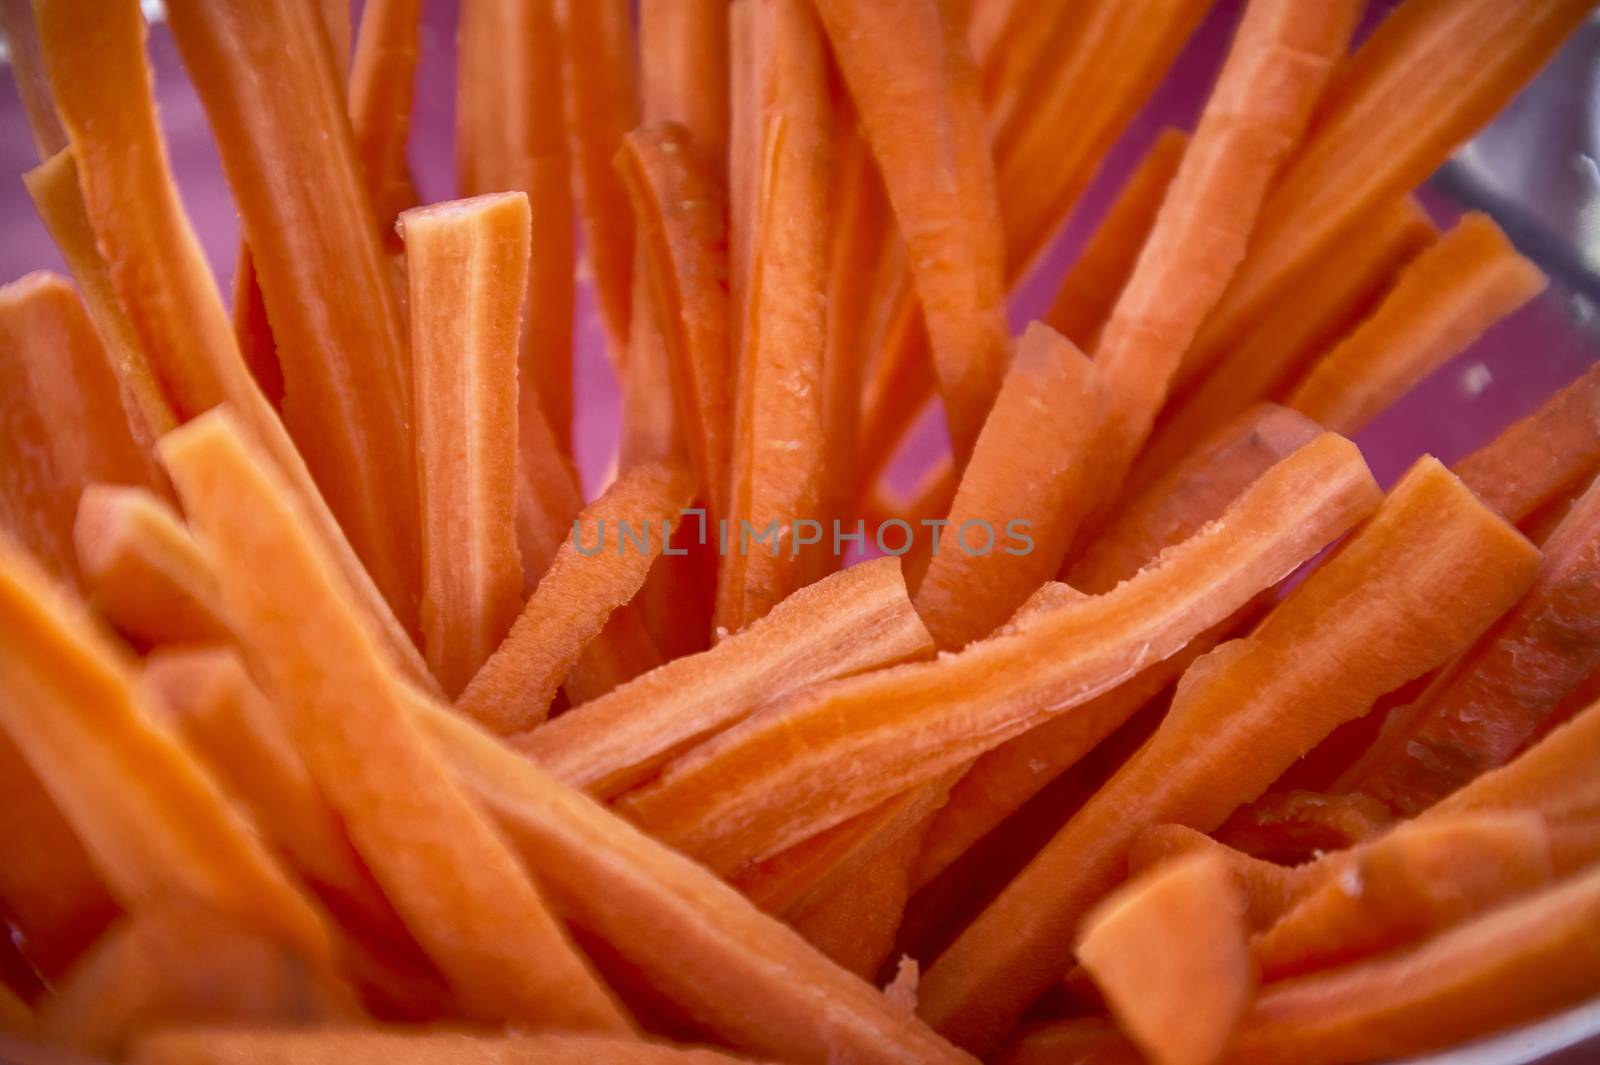 Carrots sliced in julienne and arranged in an artistic composition to embellish the table for a lunch or aperitif.